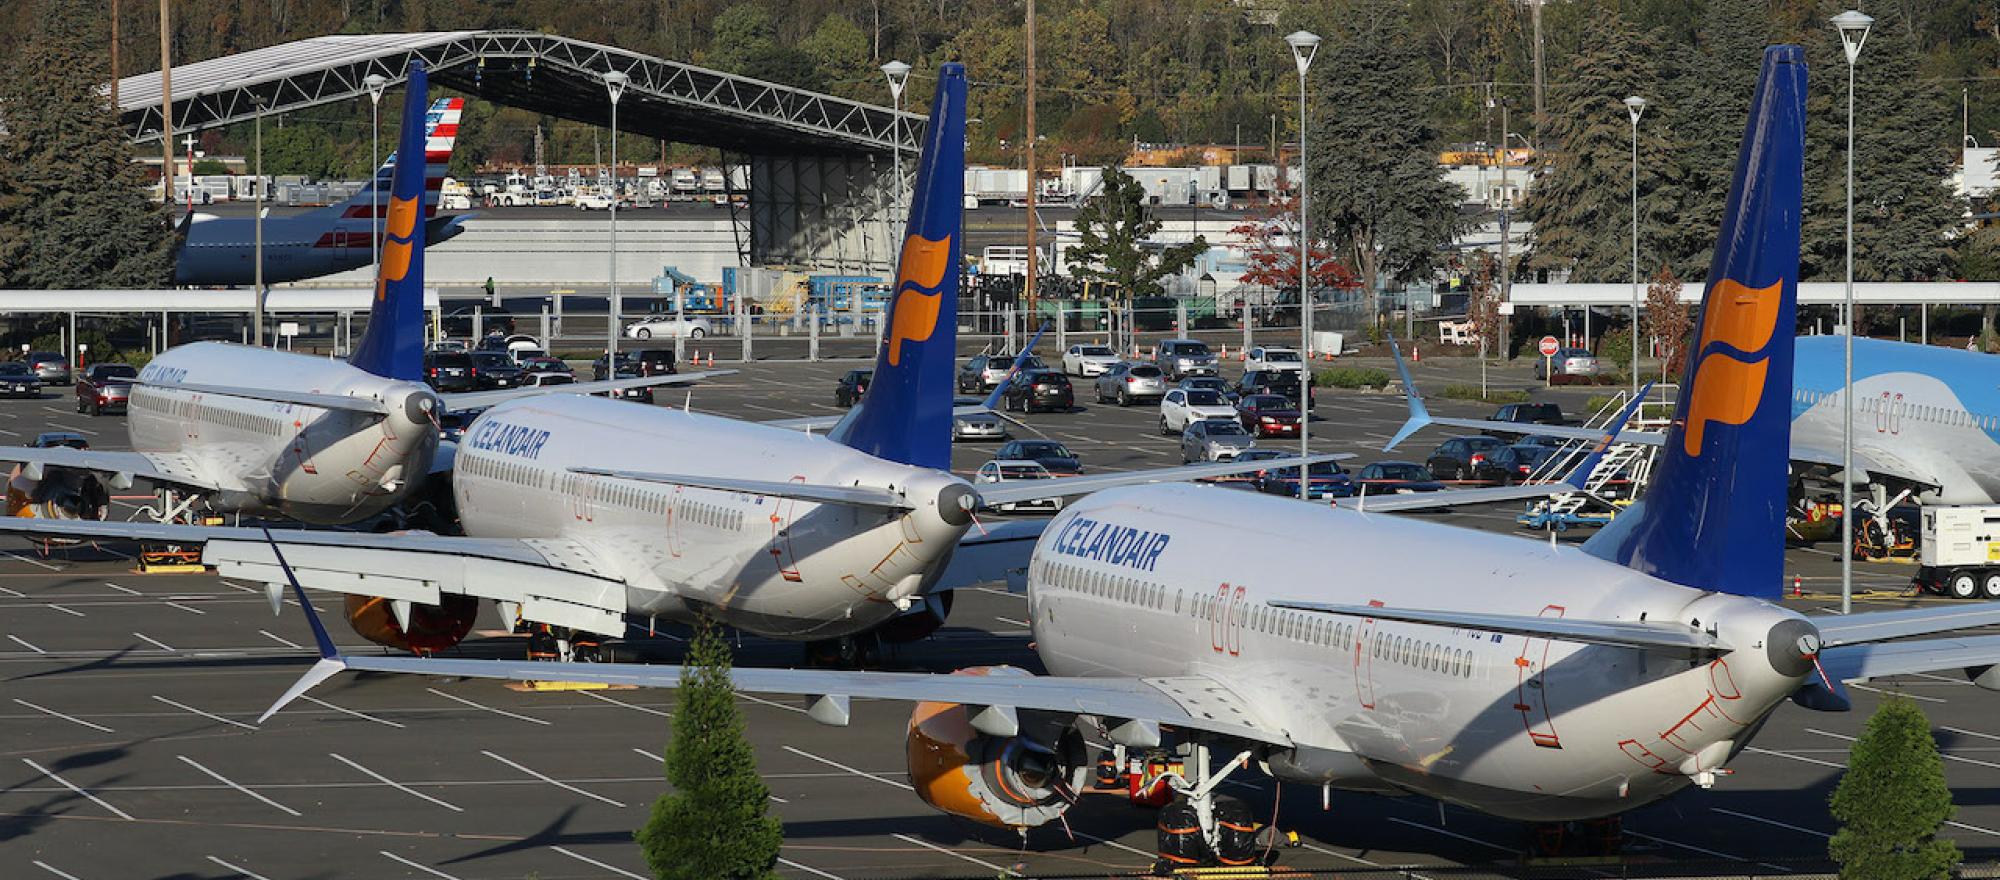 Boeing 737 Max jets sit grounded in a parking lot at Boeing Field in Seattle. (Photo: Barry Ambrose)